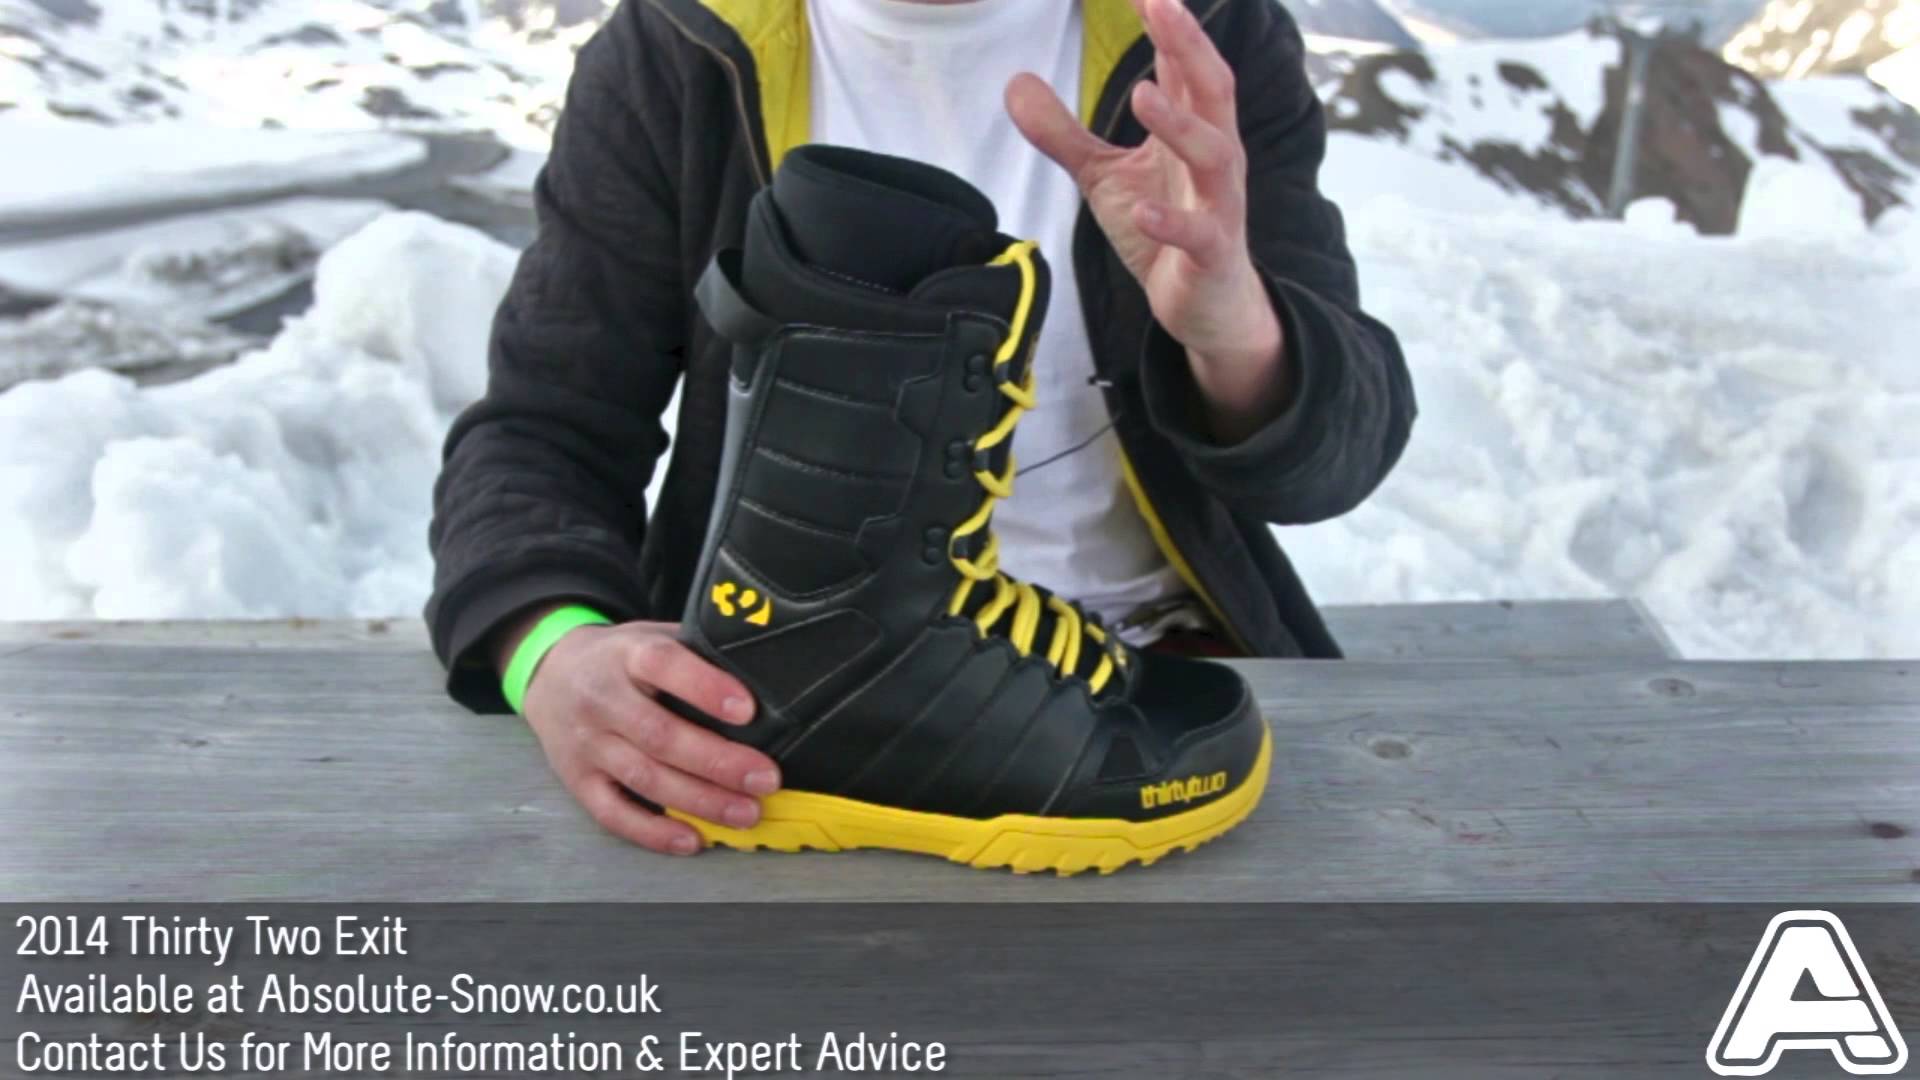 2013 / 2014 | ThirtyTwo Exit 12 Snowboard Boot | Video Review